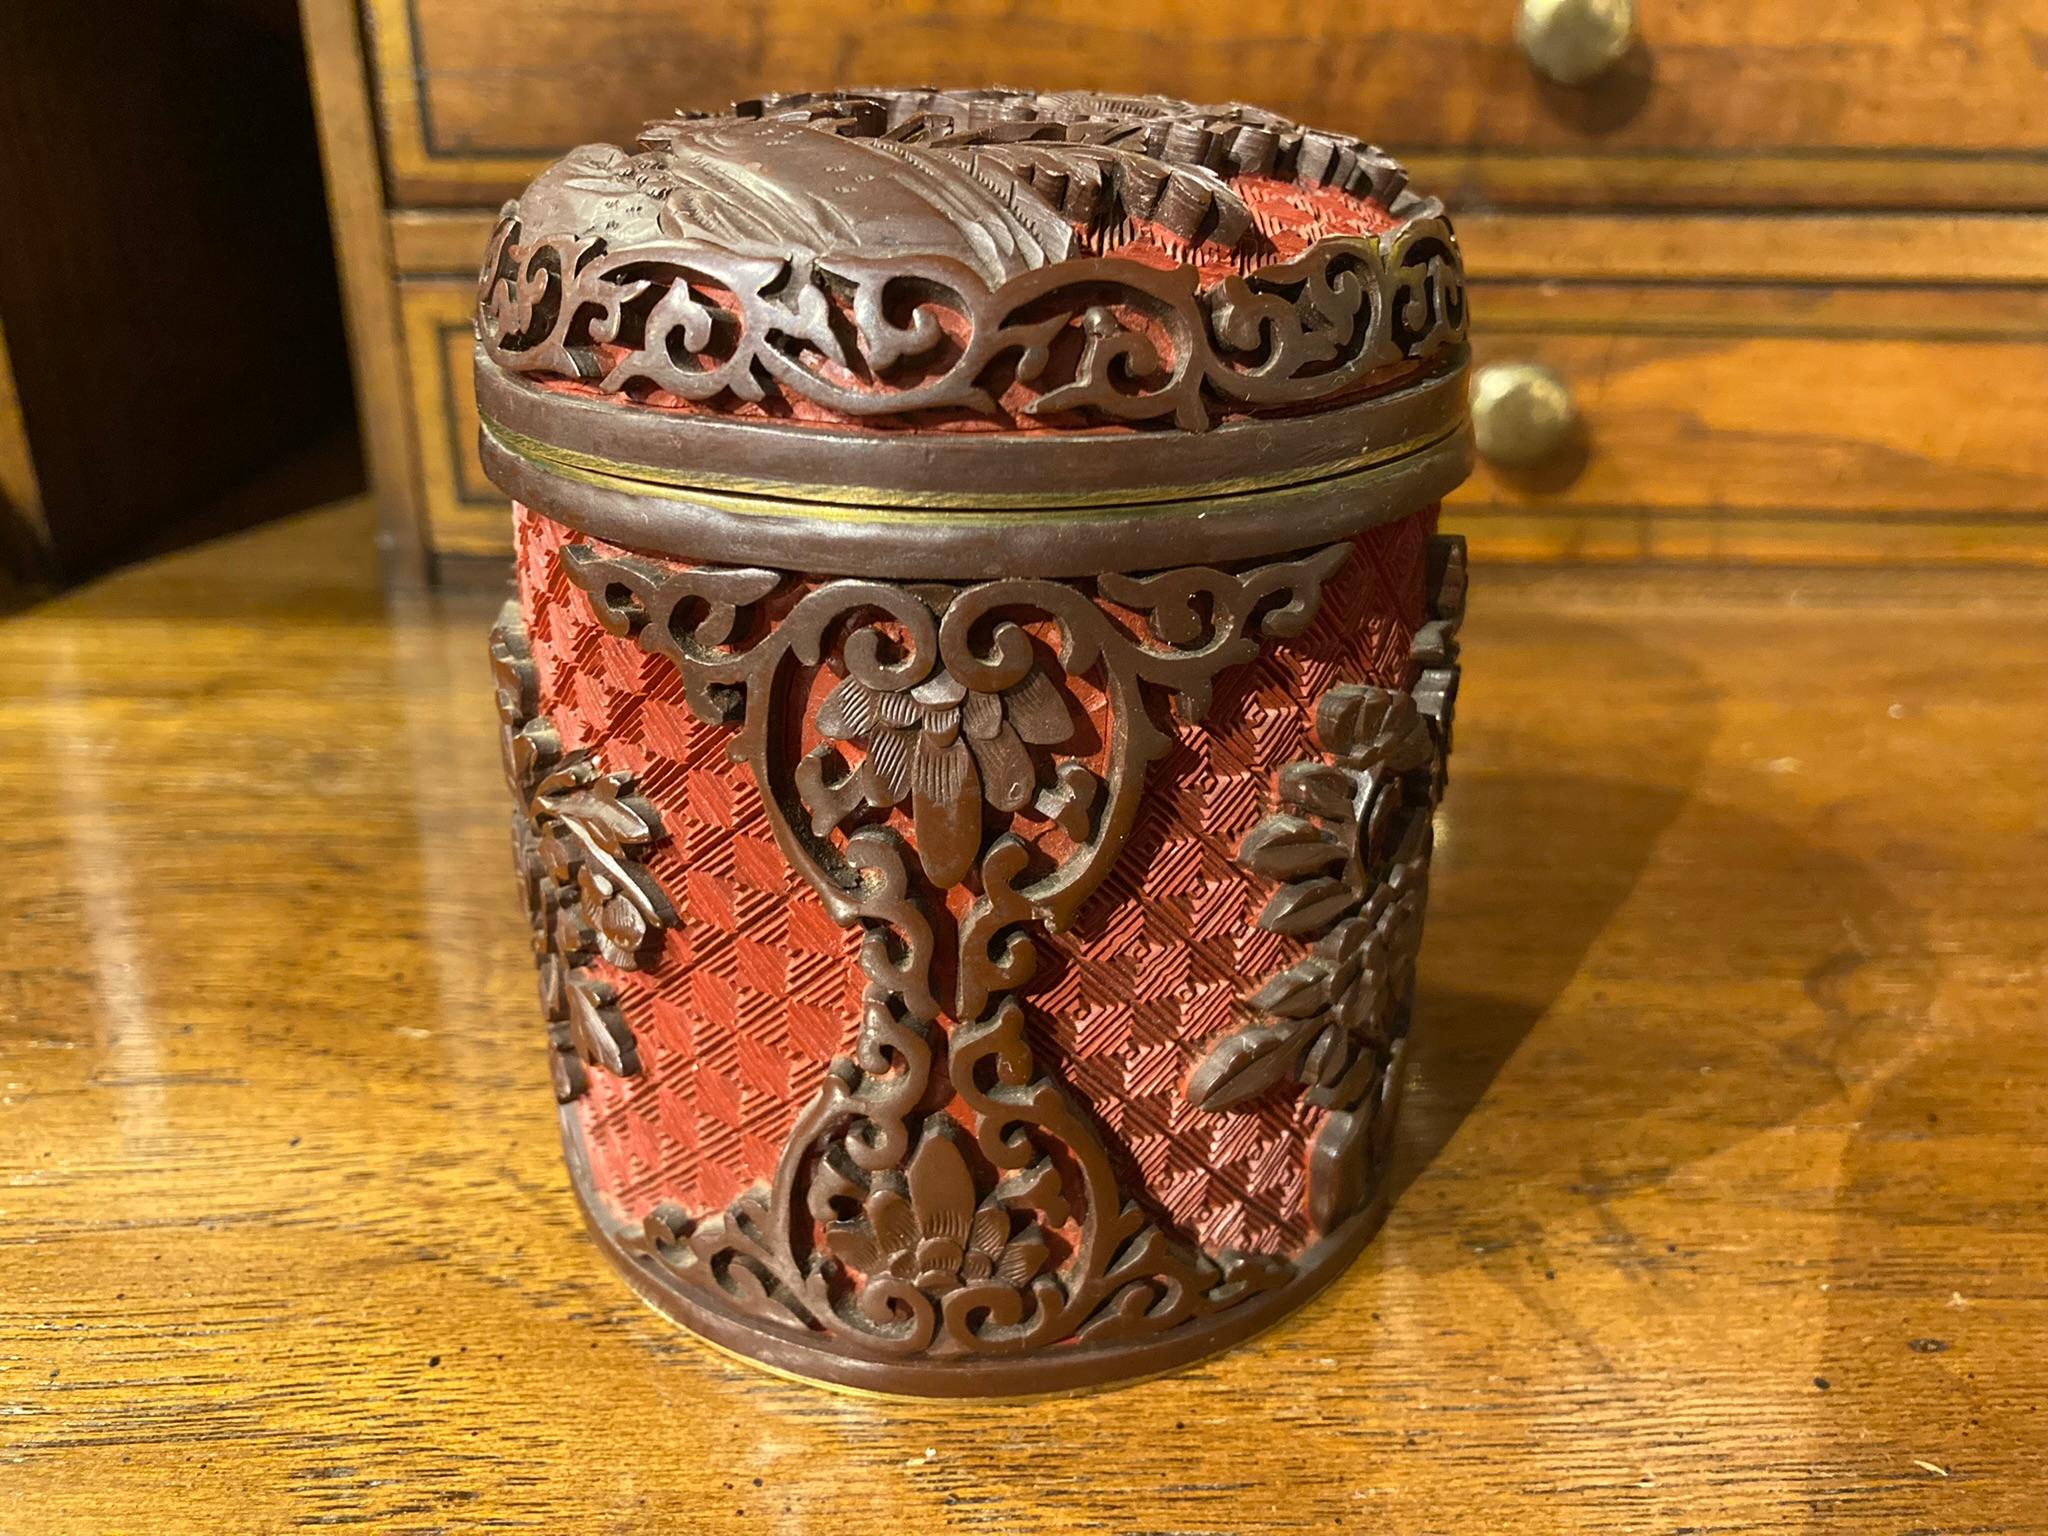 A Chinese covered jar of carved cinnabar covered jar with blue enamel interior over brass. The carving is exquisite, with deep red cinnabar in high relief against a fine background of geometric crosshatching. 
Measures: 3.75 inches high 3.25 wide